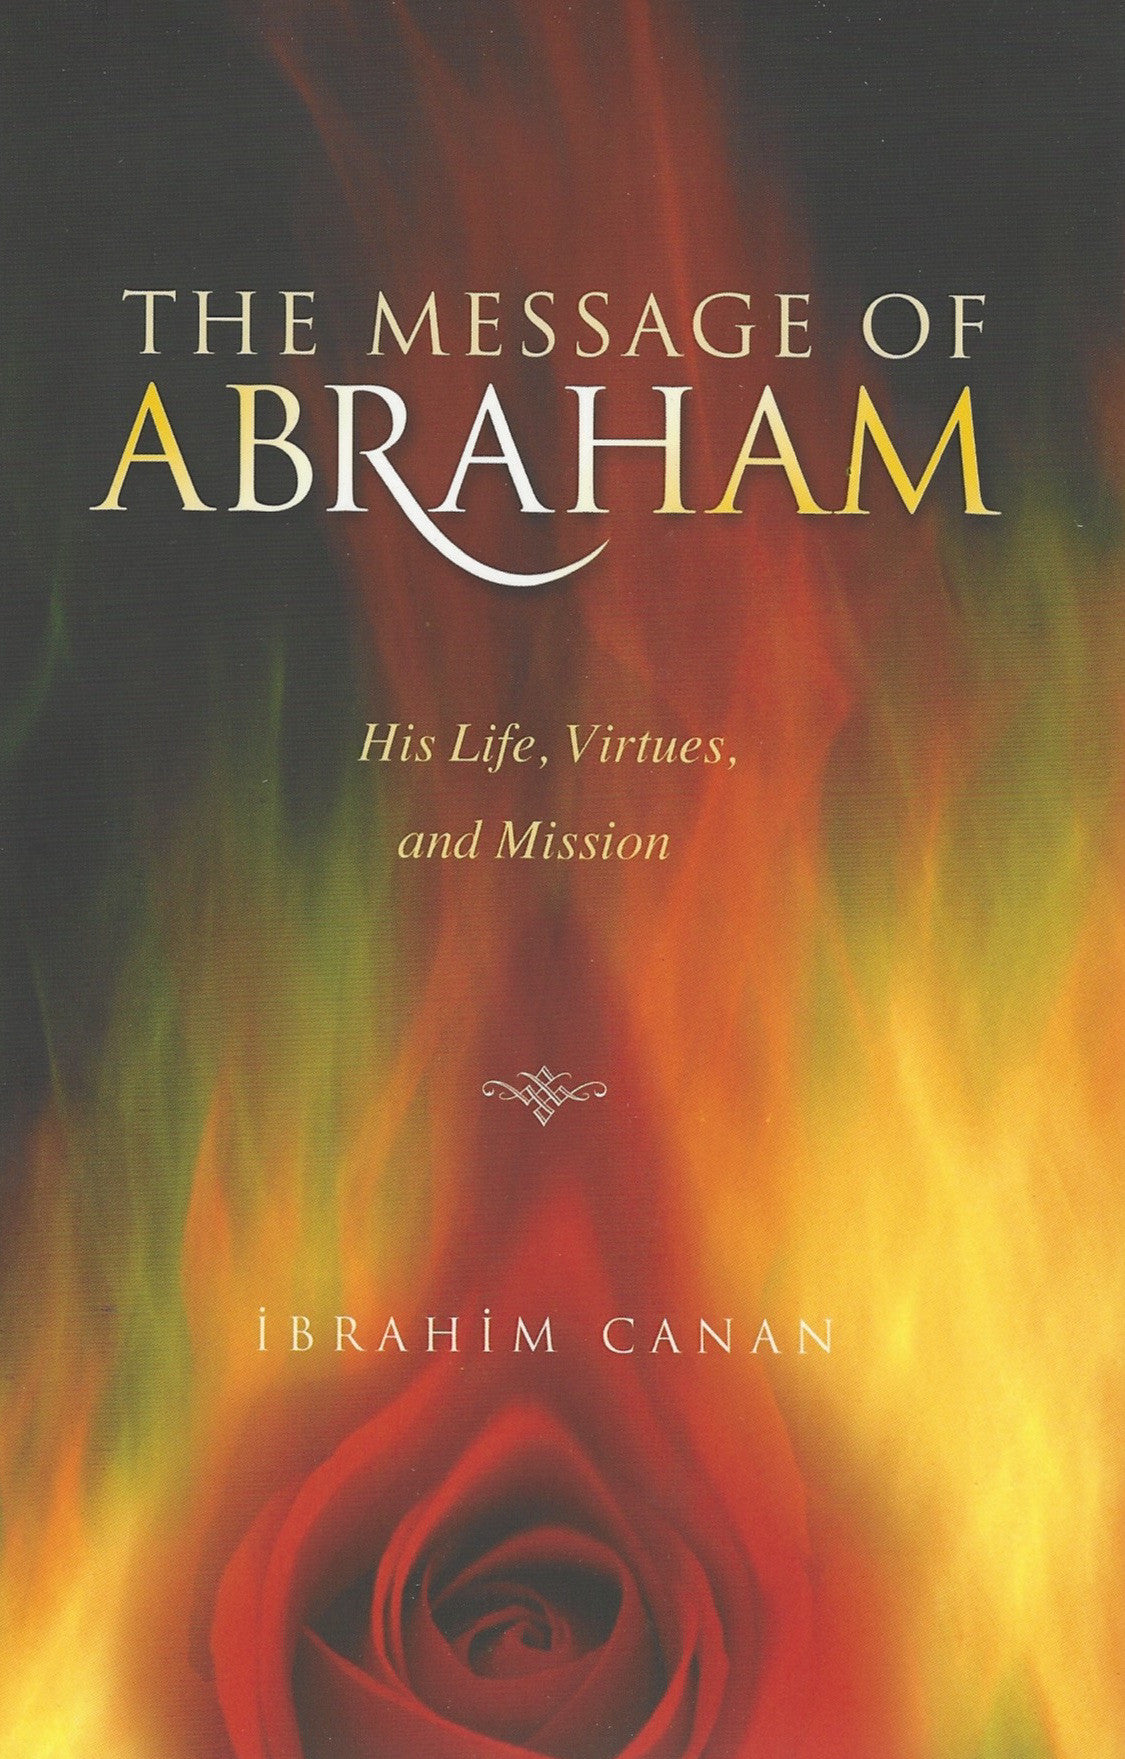 The Message of Abraham , Book - Daybreak Press Global Bookshop, Daybreak Press Global Bookshop
